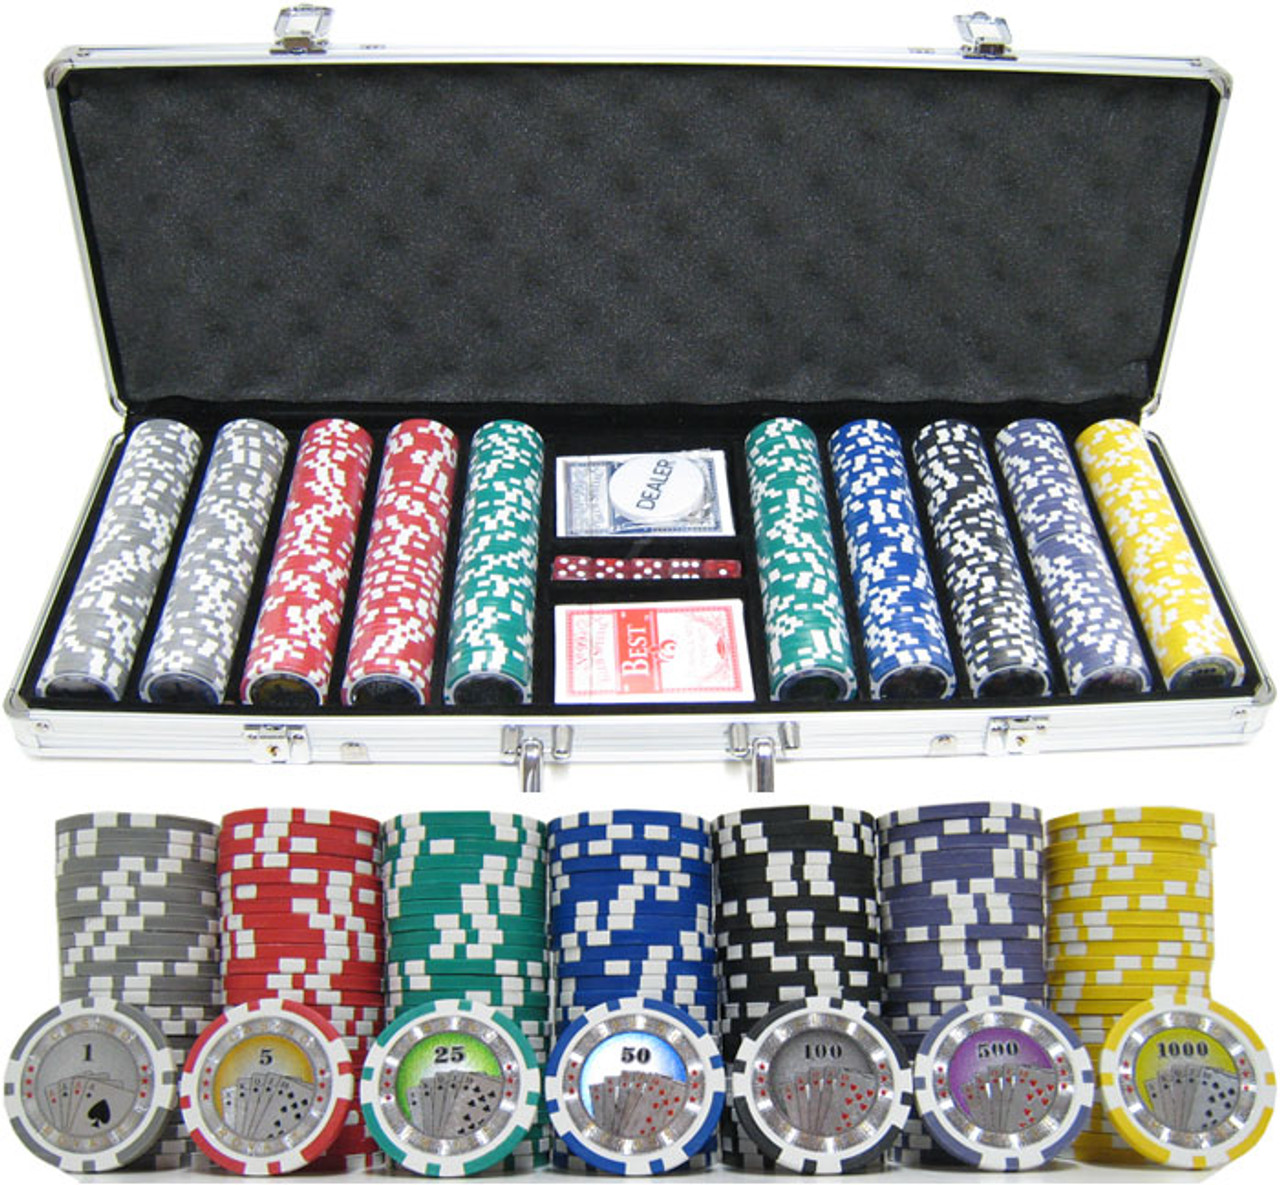 500pc Casino Royale Clay Poker Chip - Gamblers